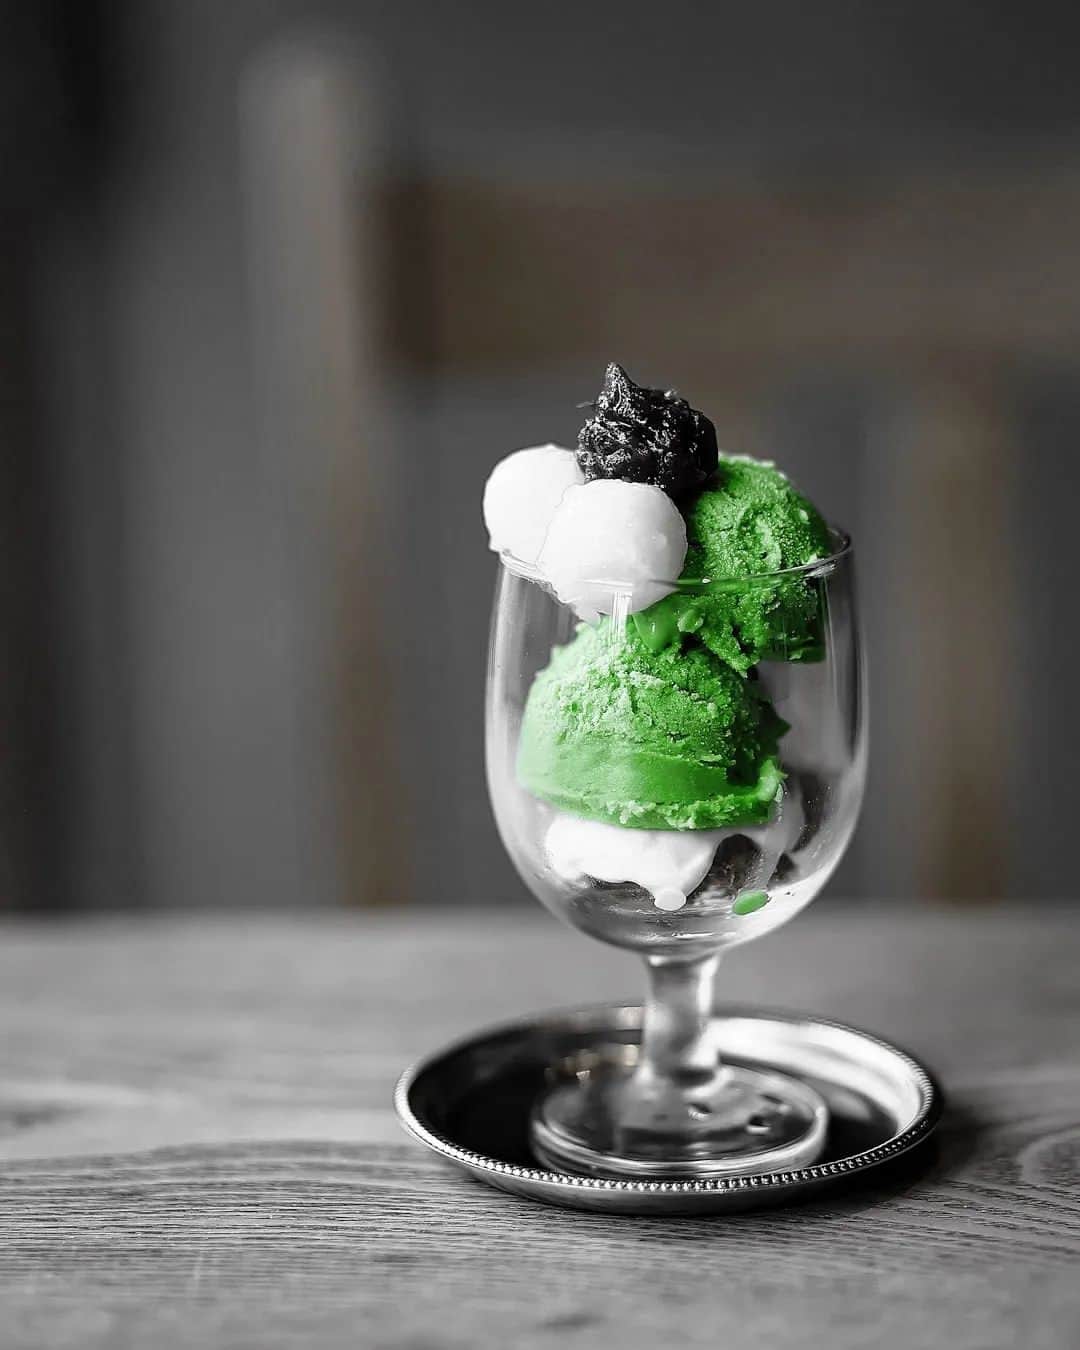 Matchæologist®のインスタグラム：「😍 We’re all about having a cup of #Matcha #Parfait! 📷 @g_kyotocafe definitely has the best idea for a perfect #MatchaDessert. 👌 Hands up if you agree! . 👉 Visit Matchaeologist.com and explore our range of artisanal matcha that will give you a myriad of possibilities in the kitchen! Matcha is perfect for jazzing up any dish to make it into something totally #Matchamazing! 😇 . 👉 Click the link in our bio @Matchaeologist. . Matchæologist® #Matchaeologist Matchaeologist.com」